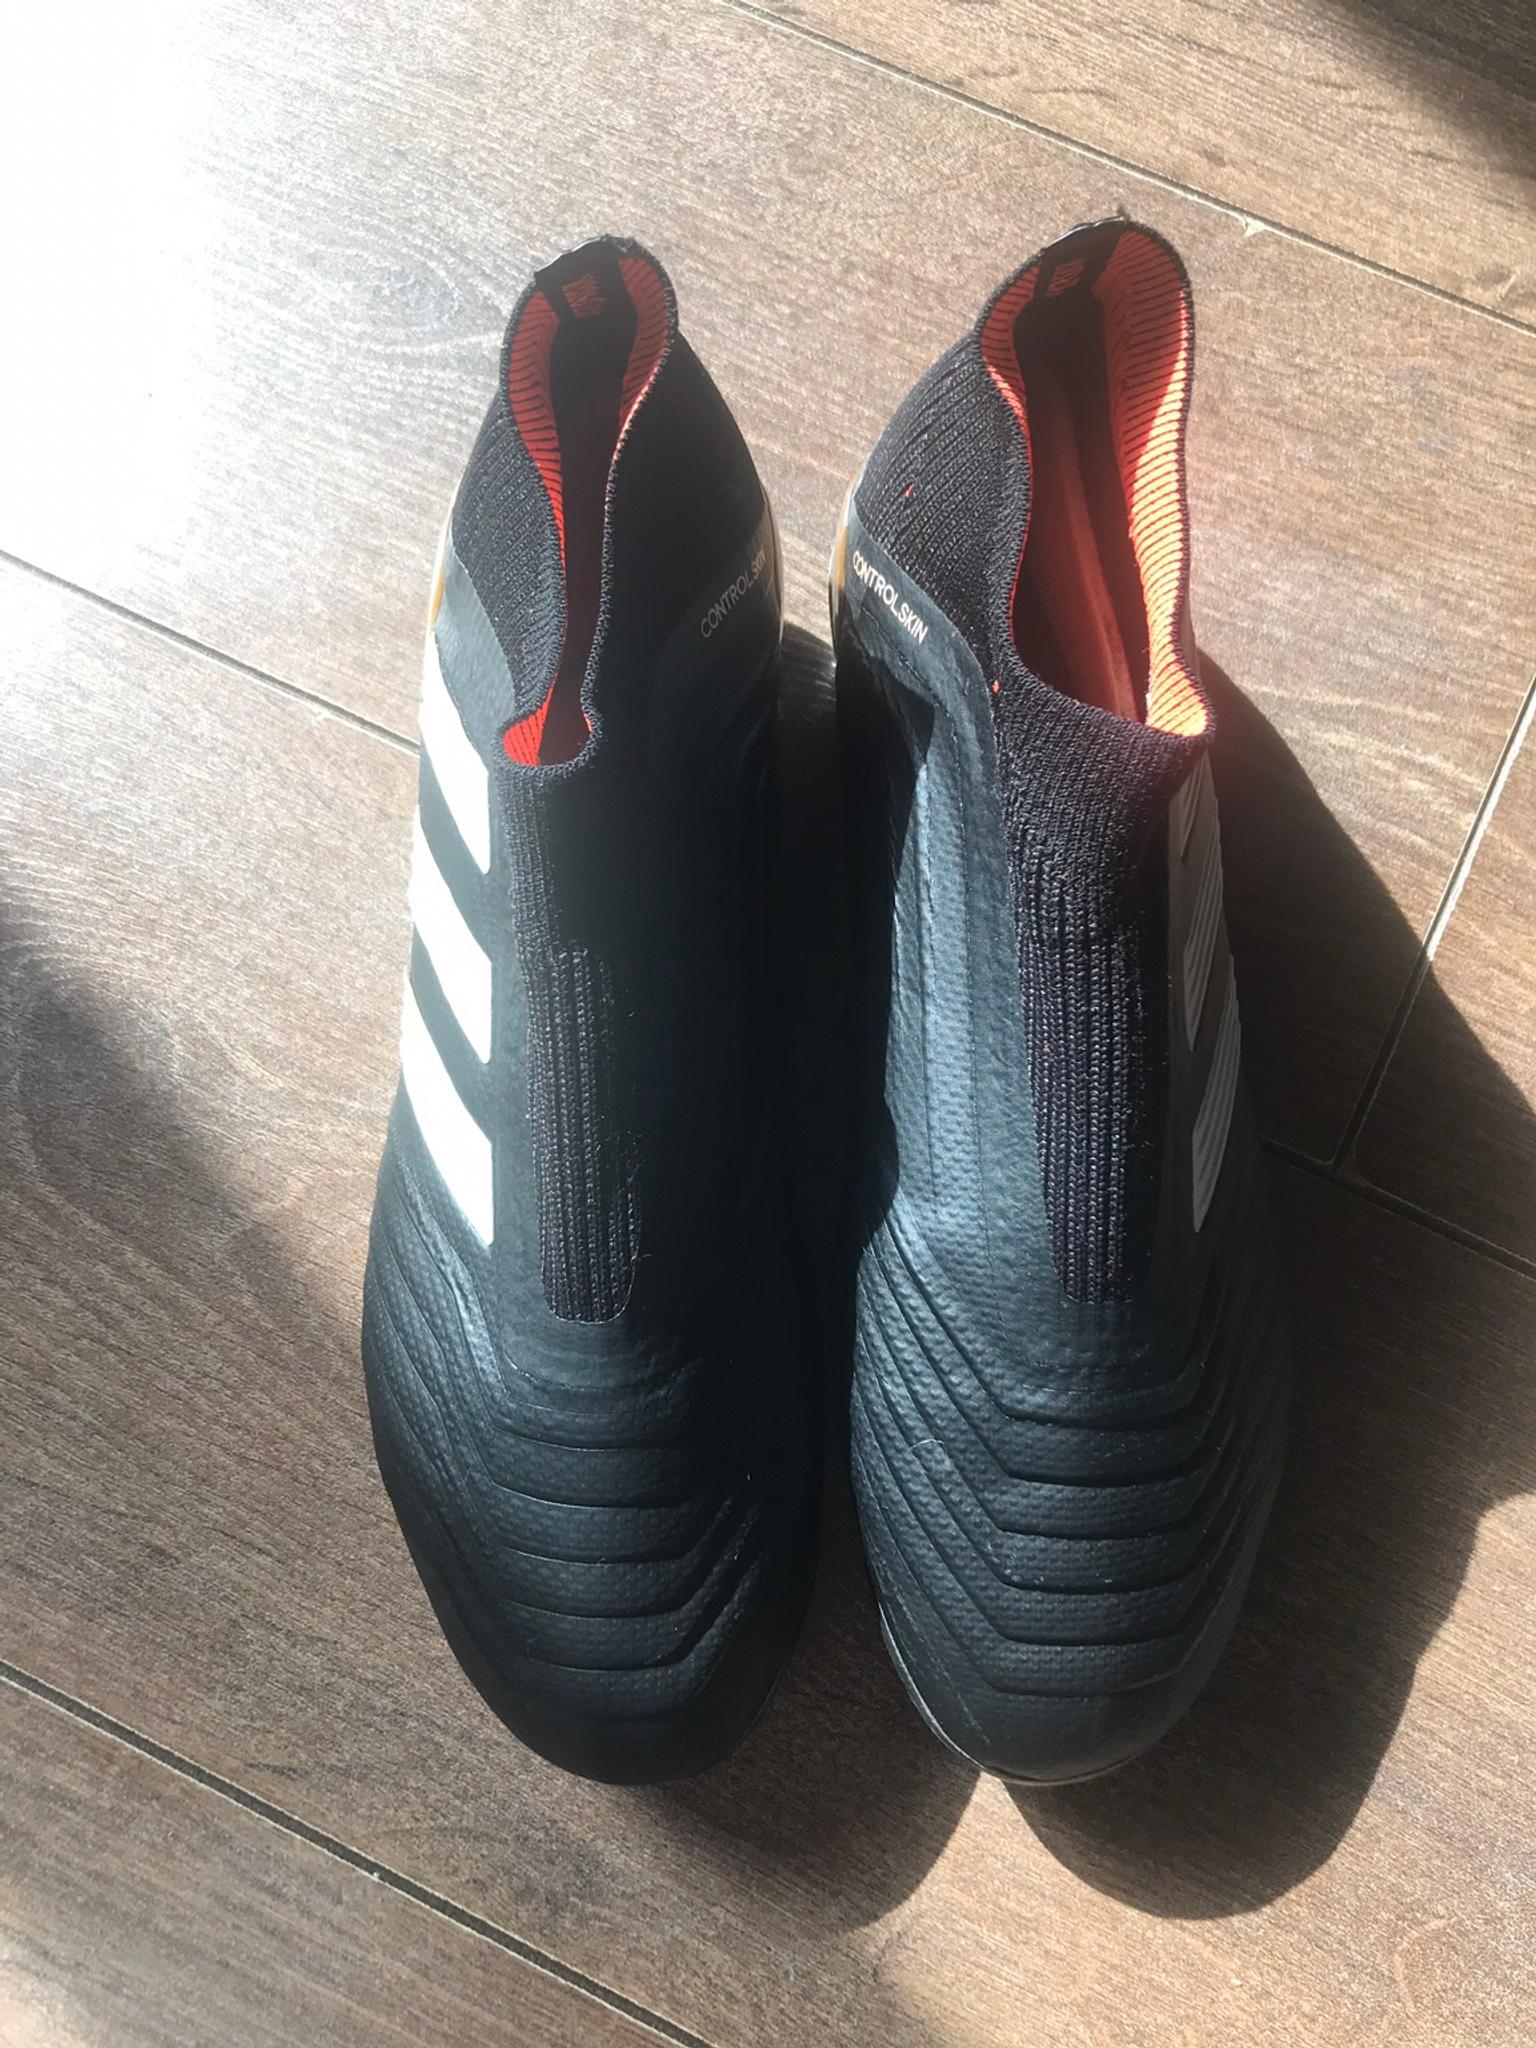 laceless football boots size 5